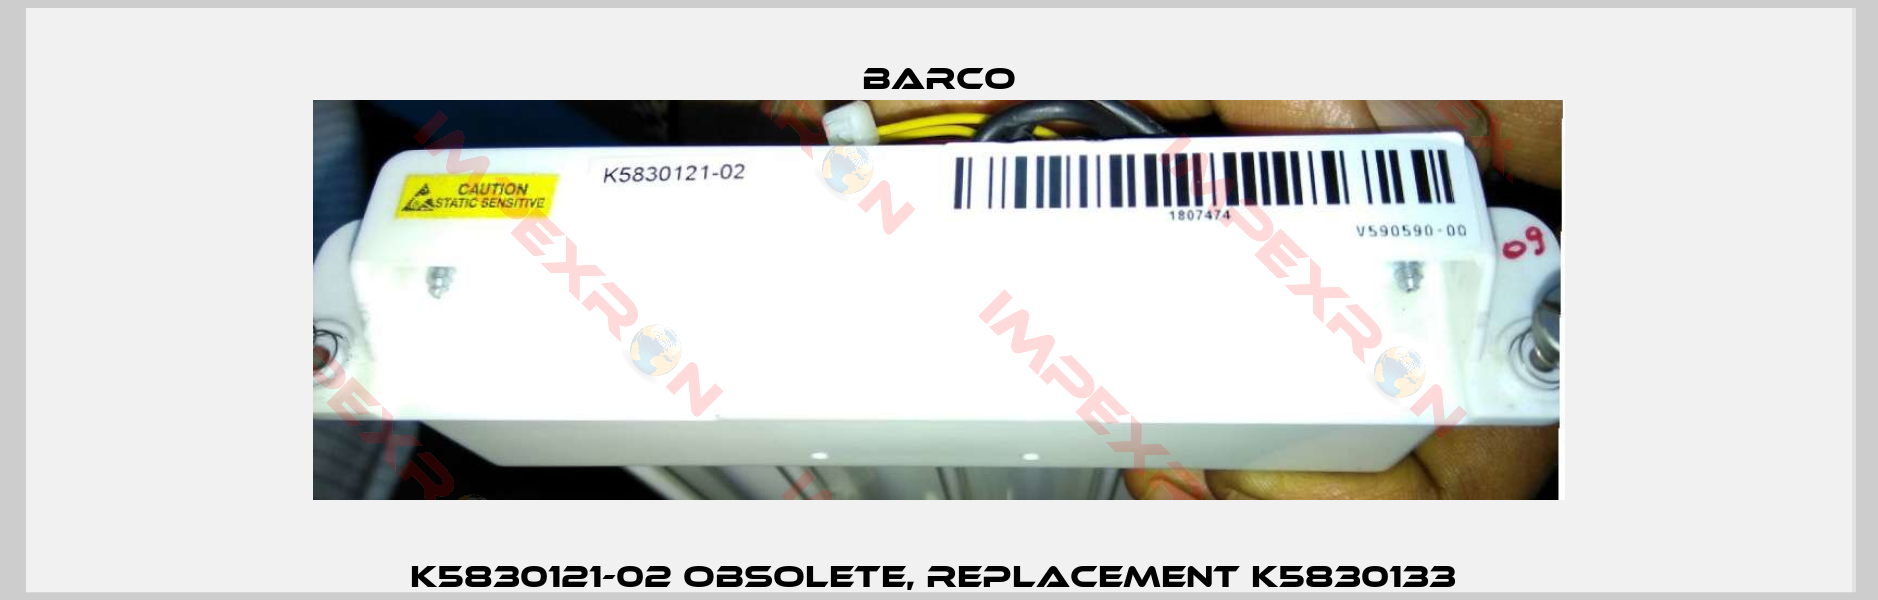 K5830121-02 obsolete, replacement K5830133 -2